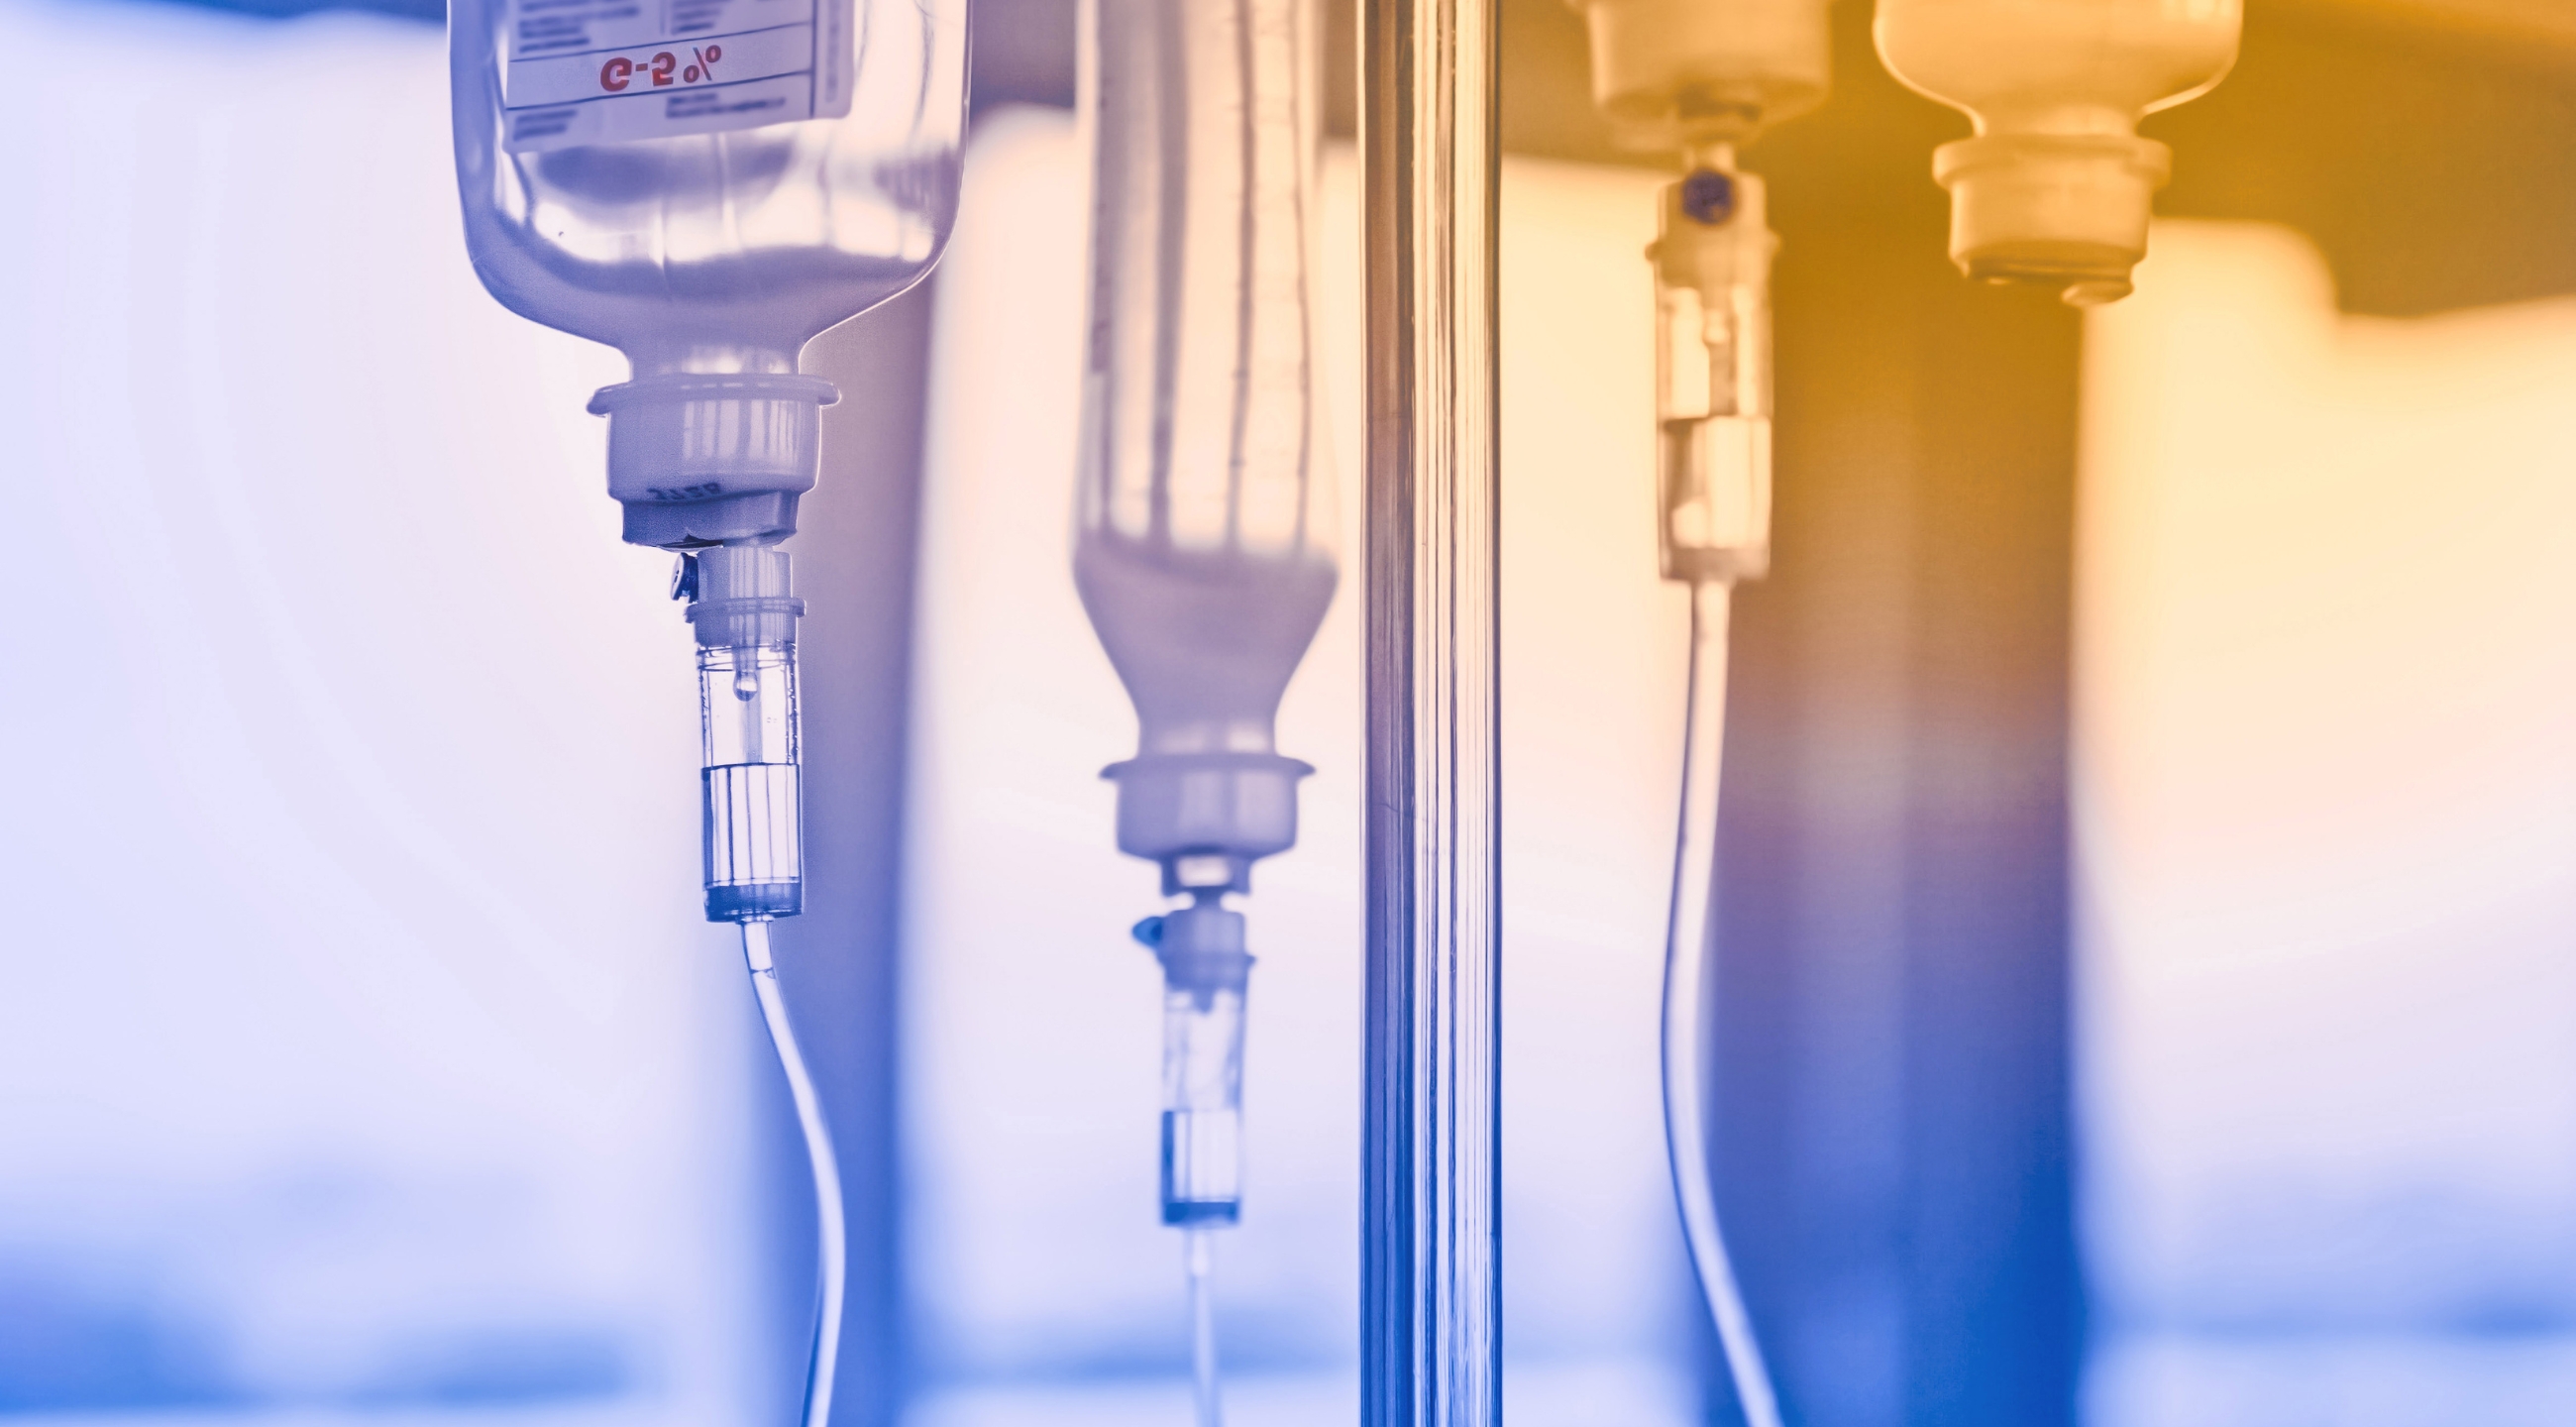 A blue and orange toned image displaying IV bags hanging on an IV pole.